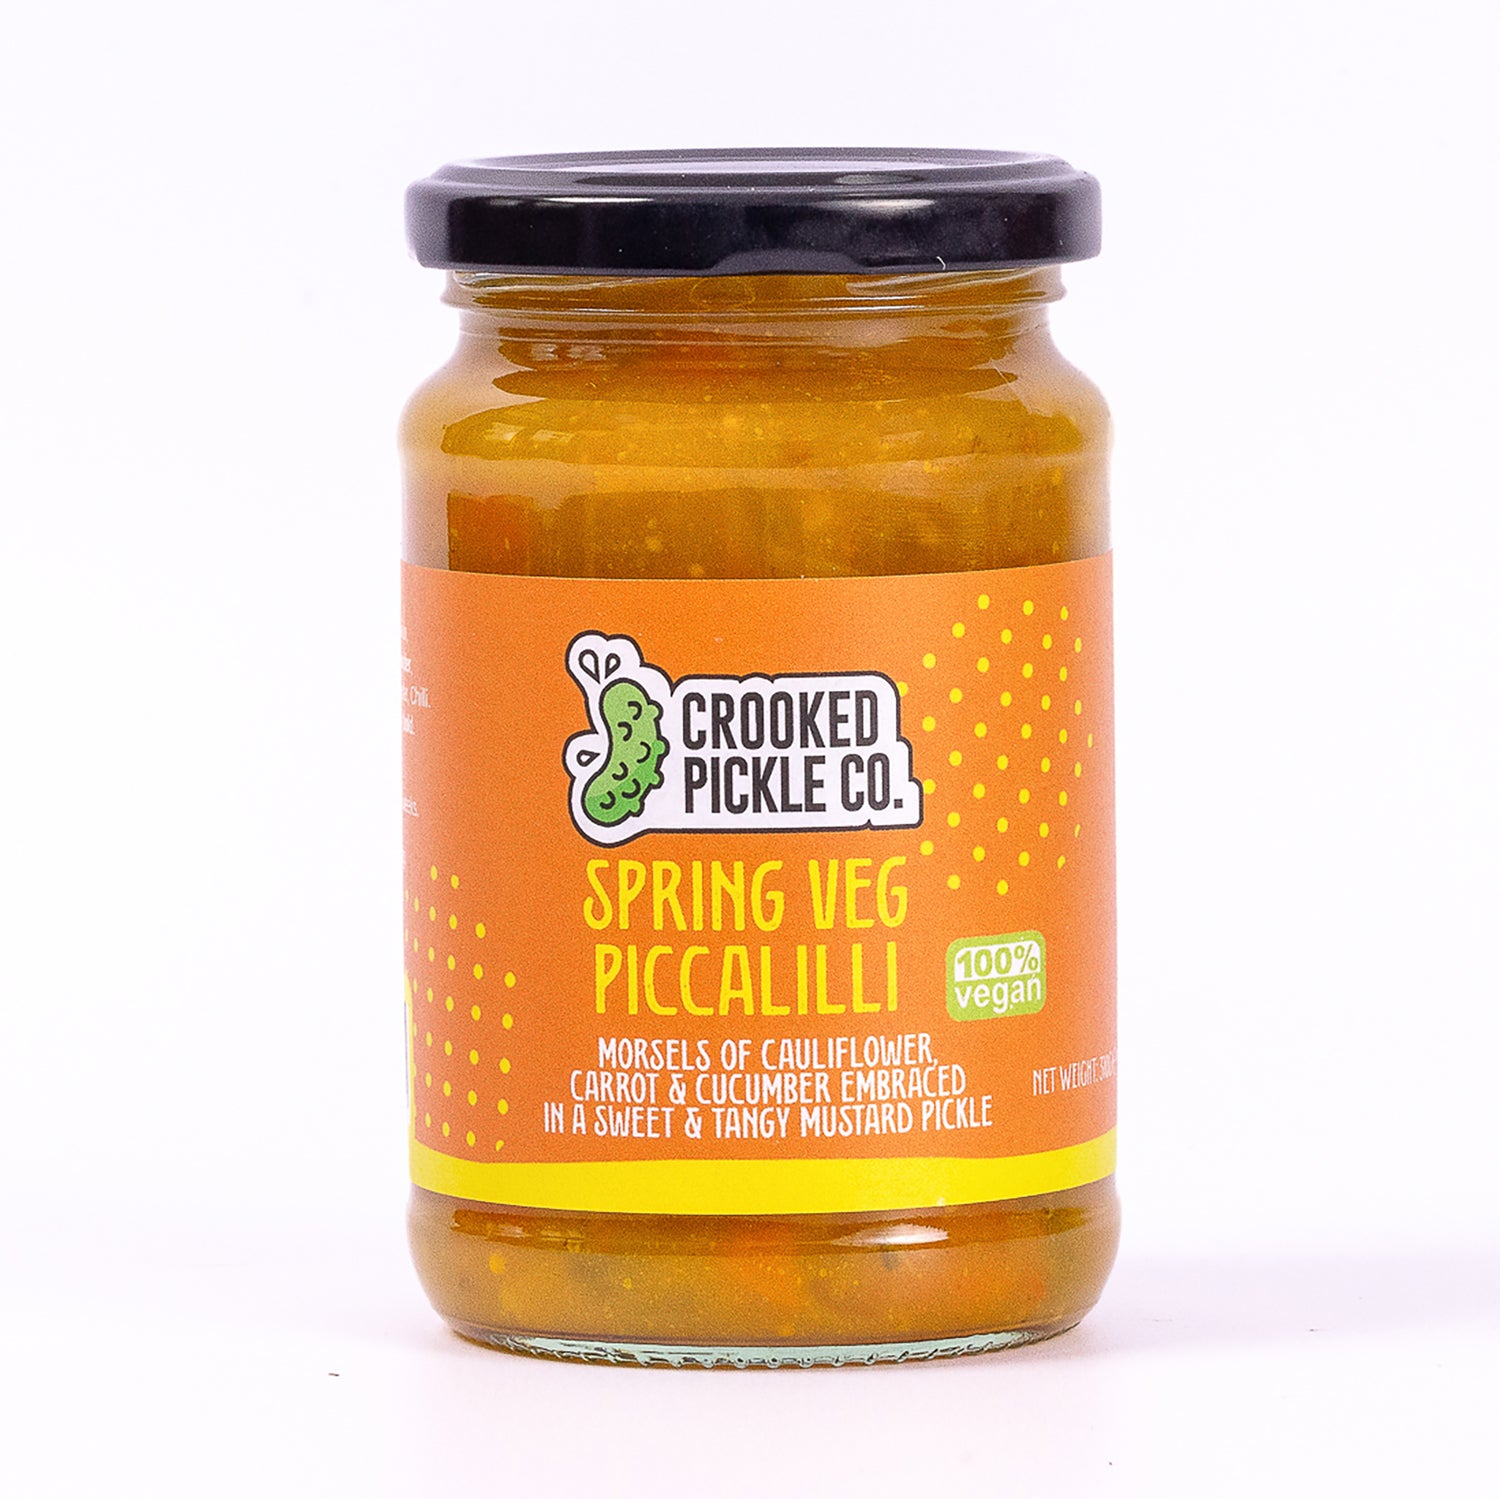 Sweet mustard pickle with pickled vegetable. Sandwich, ploughmans,boxing day christmas hamper stocking filler ideas.